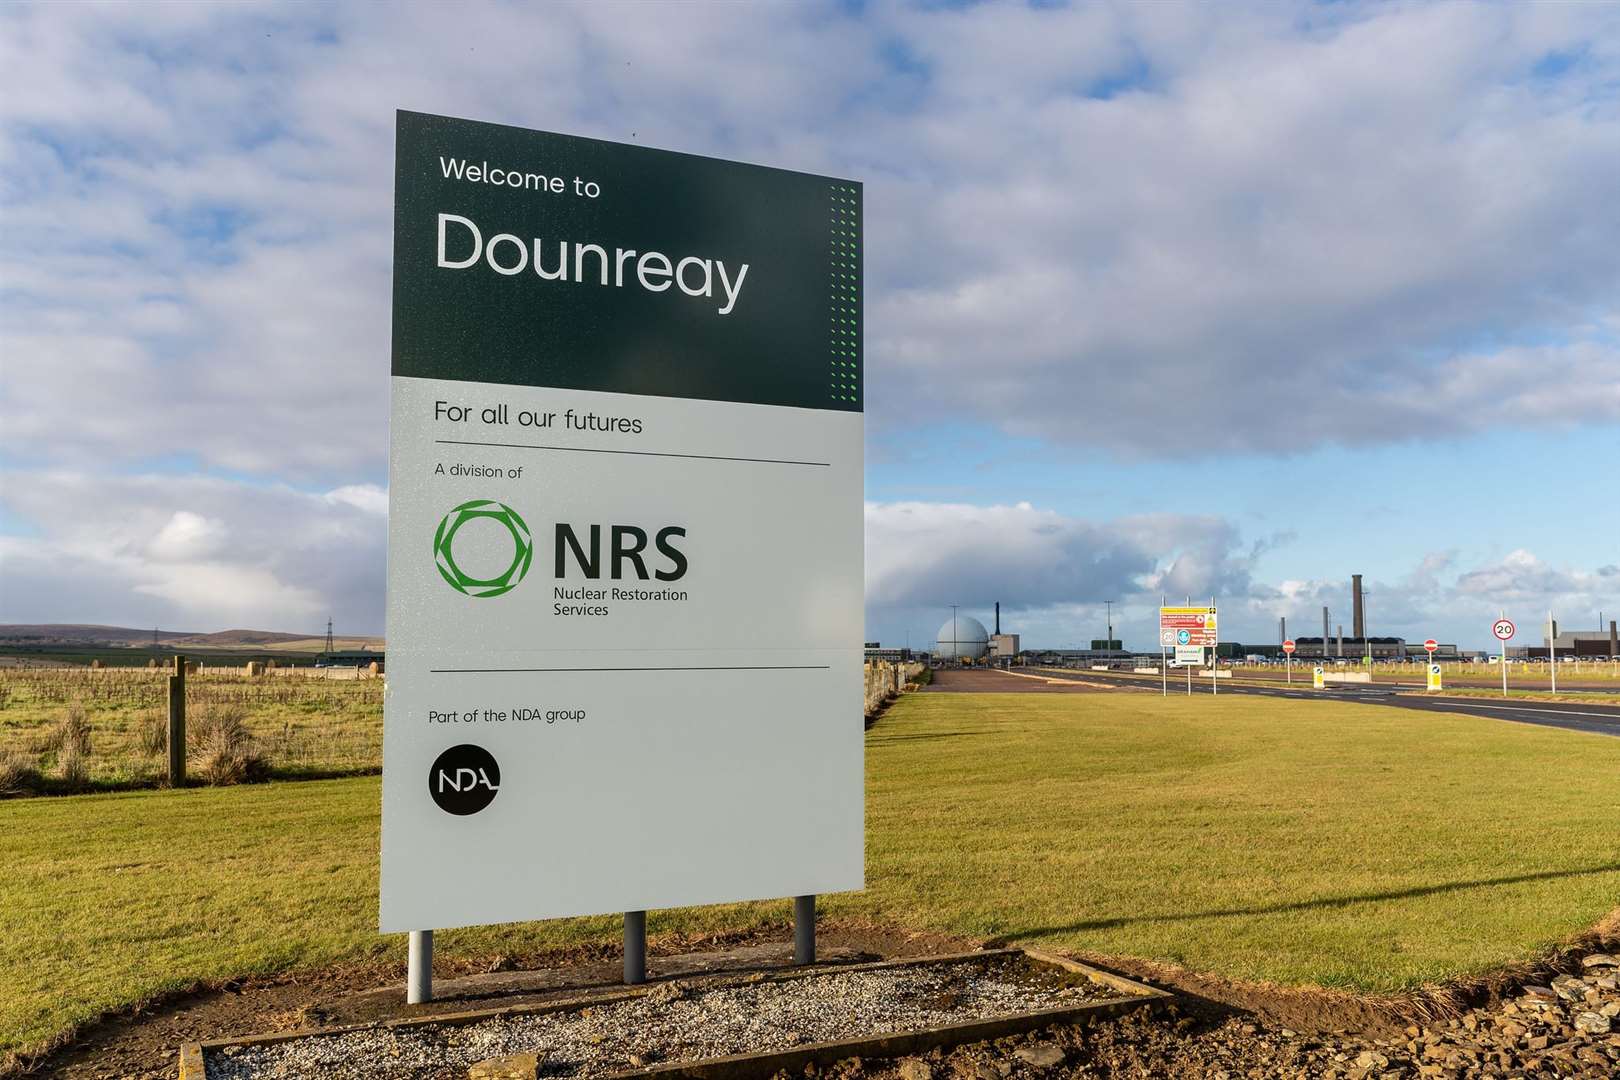 On 2022 staffing, Dounreay had 1283 employees and there were a further 700 supply chain workers. Picture: NRS Dounreay